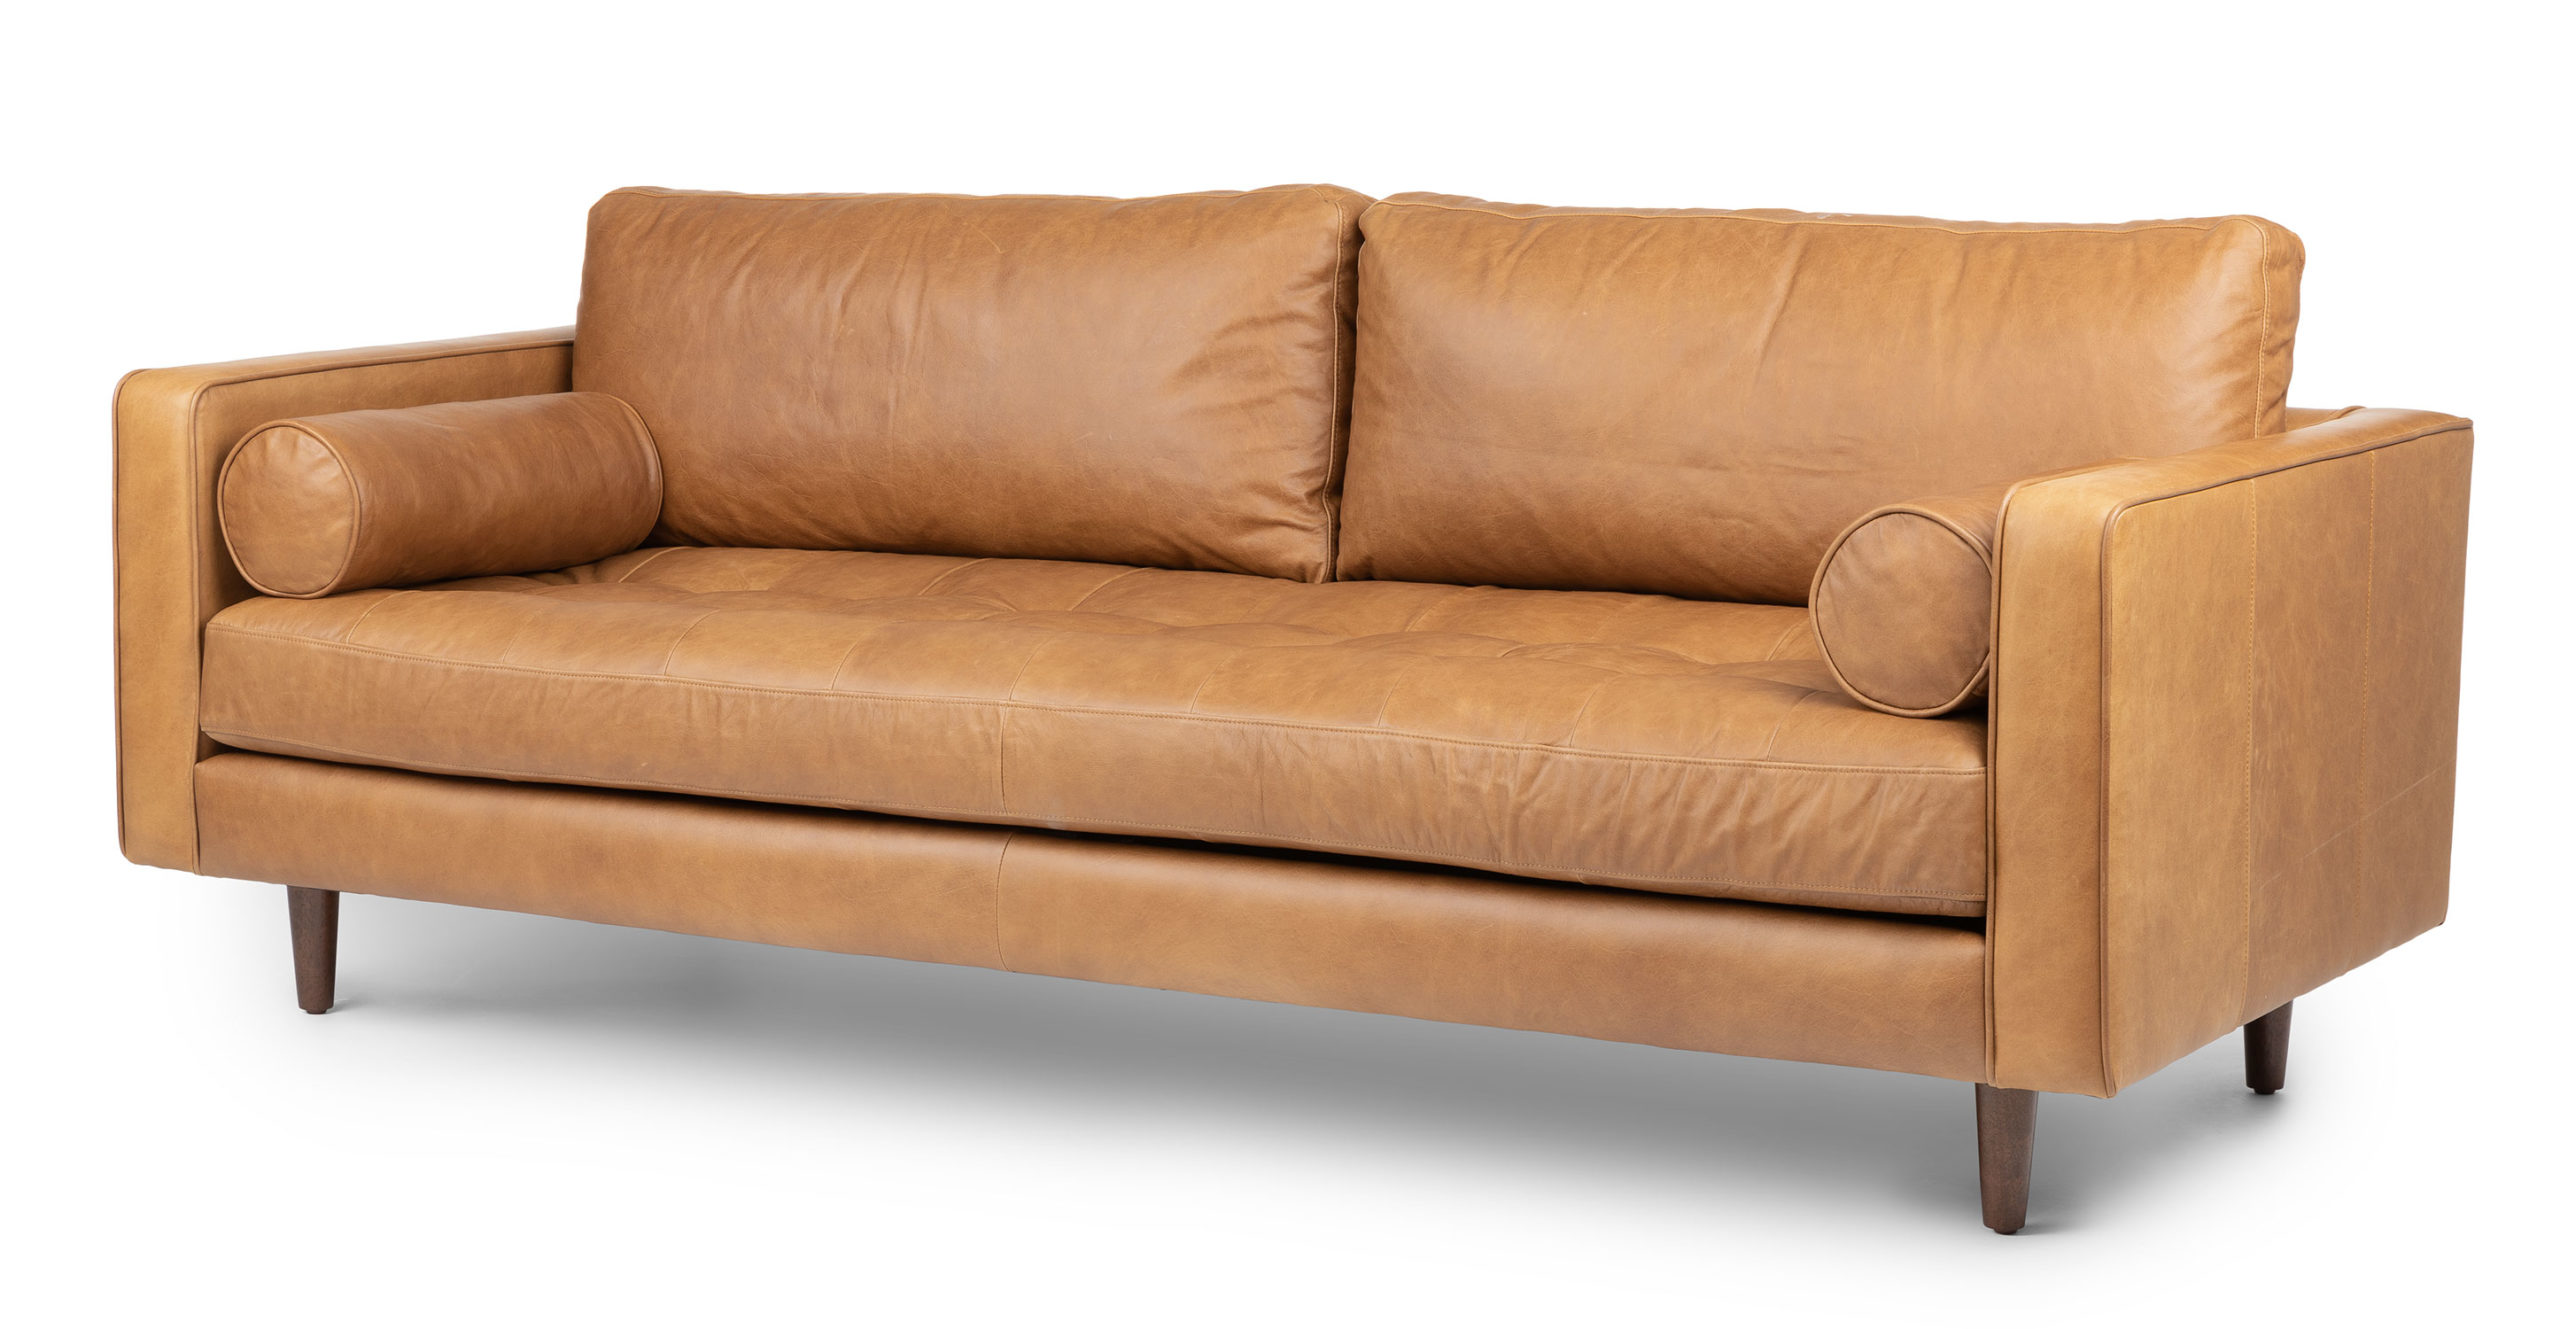 The mid-century modern Sven leather sofa by Article